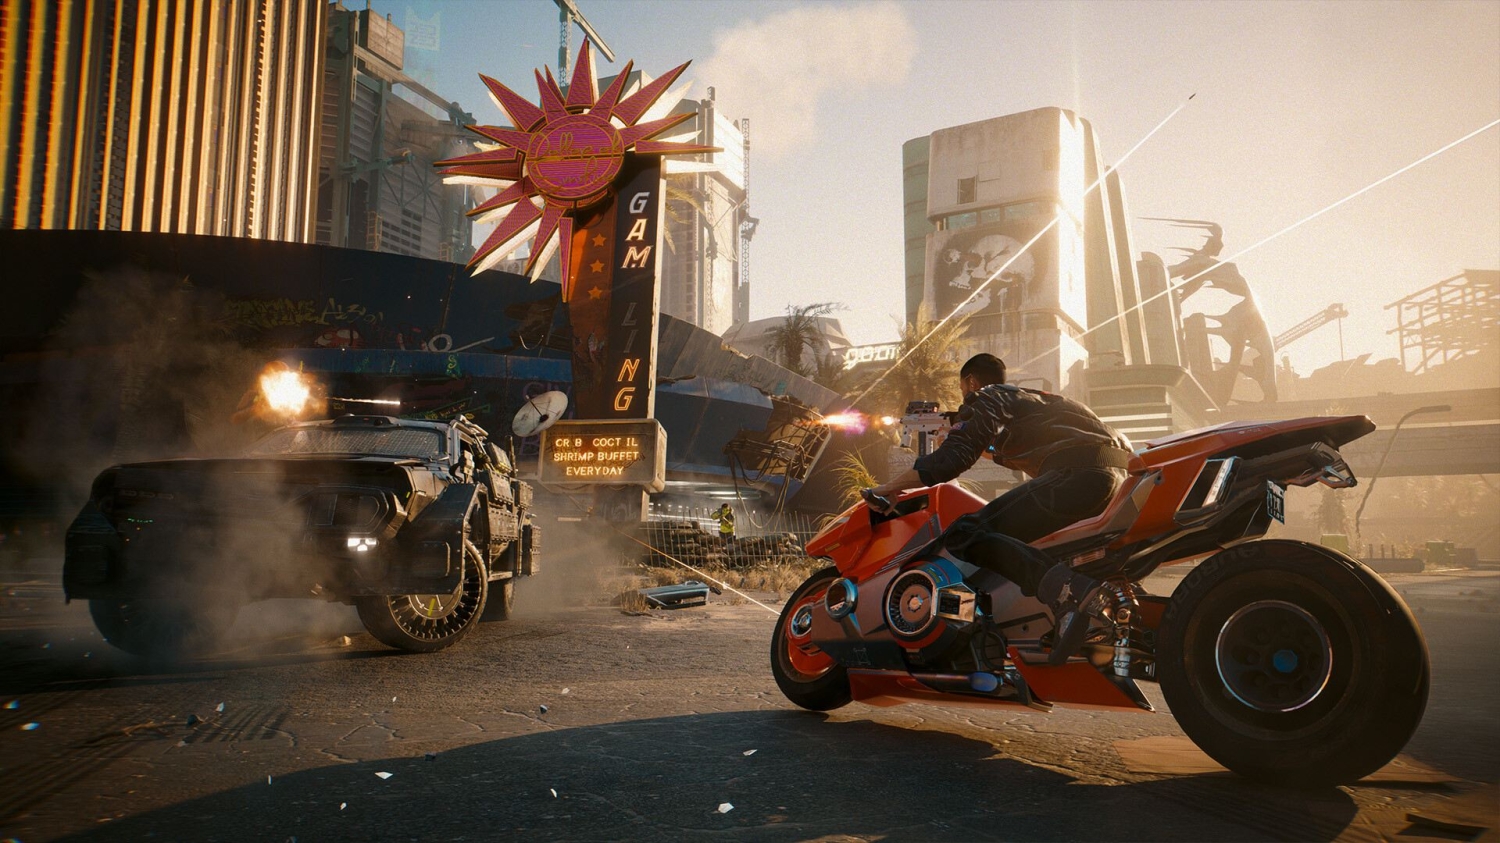 TweakTown Enlarged Image - Intel's latest driver for Arc graphics cards adds day-one support for the Cyberpunk 2077: Phantom Liberty expansion, image credit: CD Projekt Red.